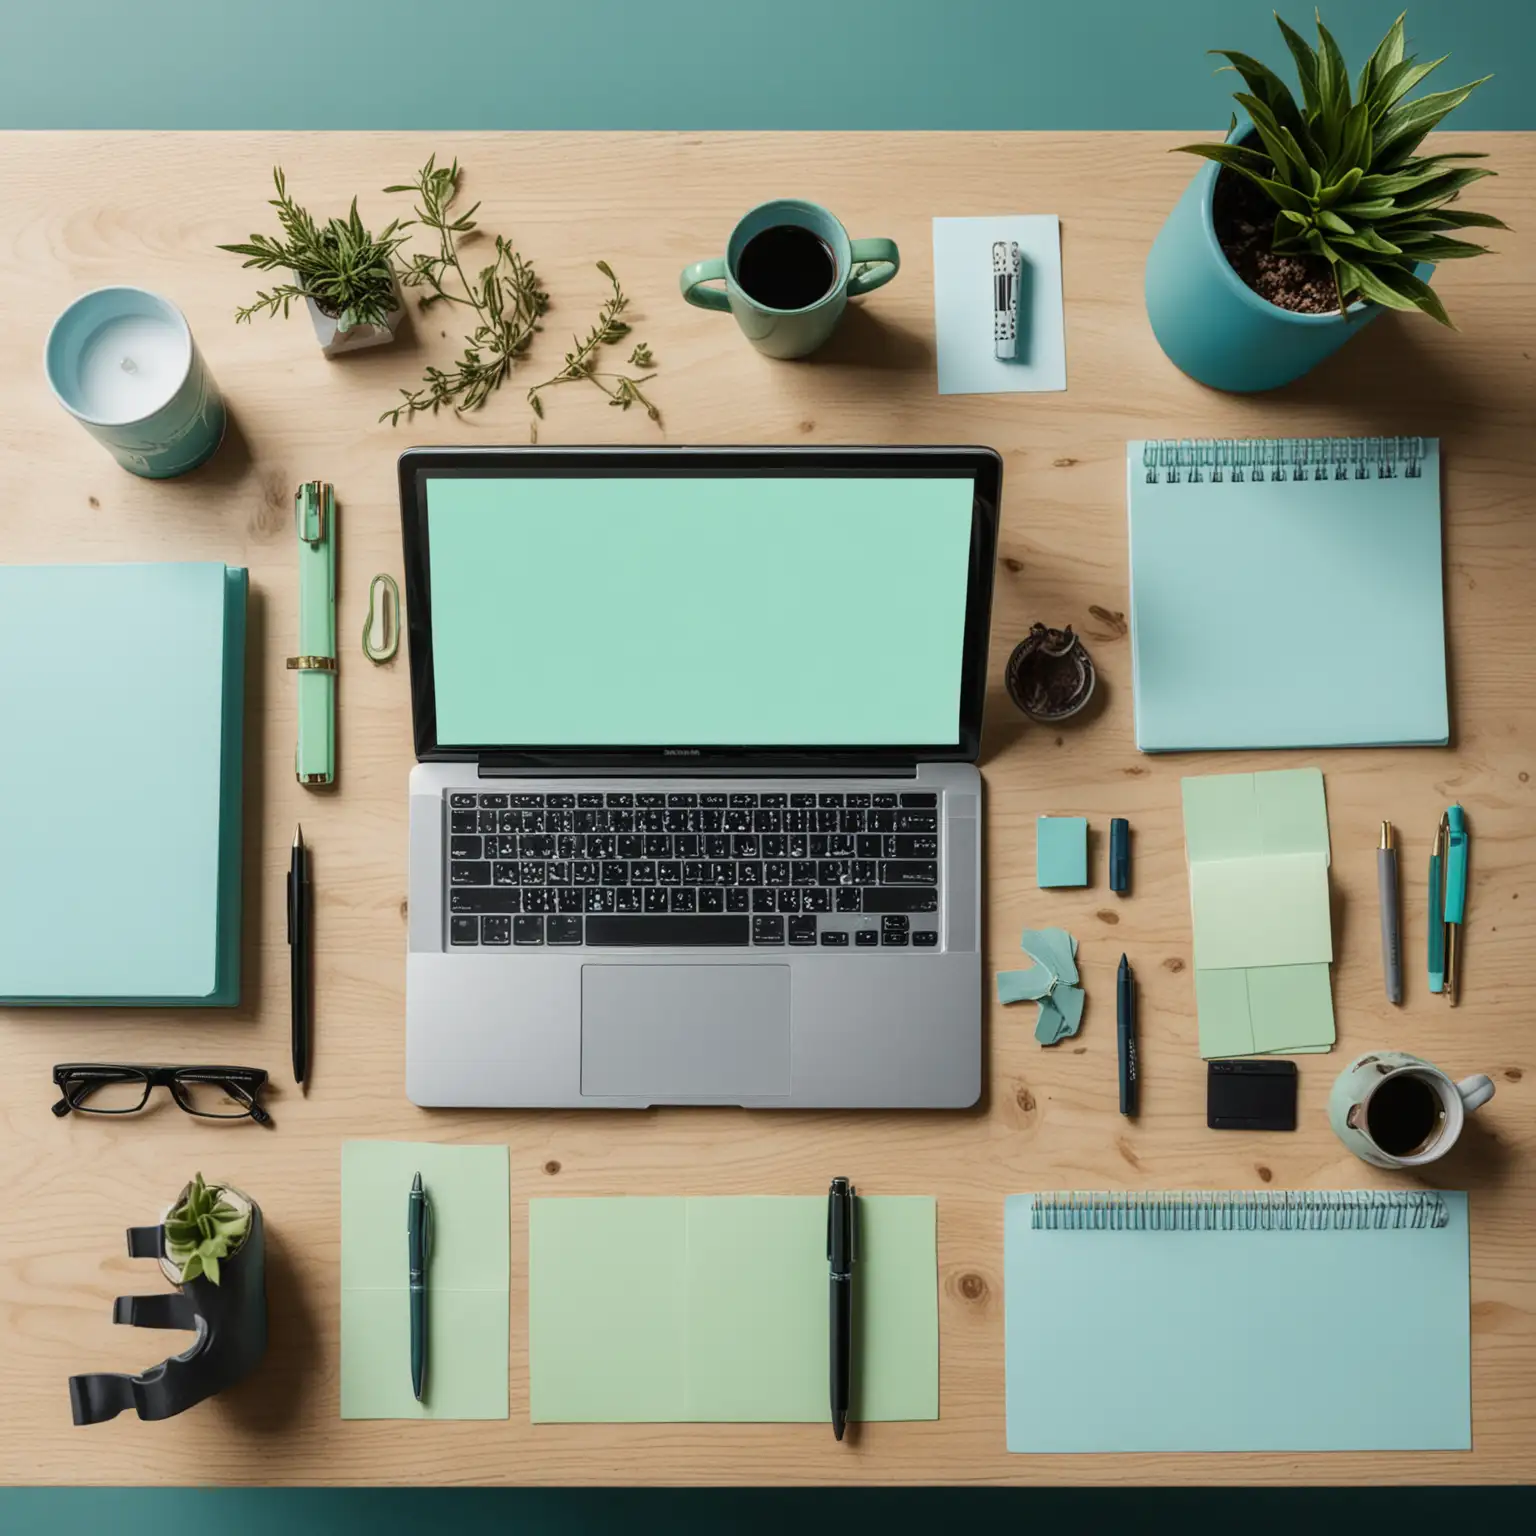 Neat Workspace Setup with Laptop Notebook Coffee Cup Pens and Sticky Notes in Harmonious Blue and Green Palette